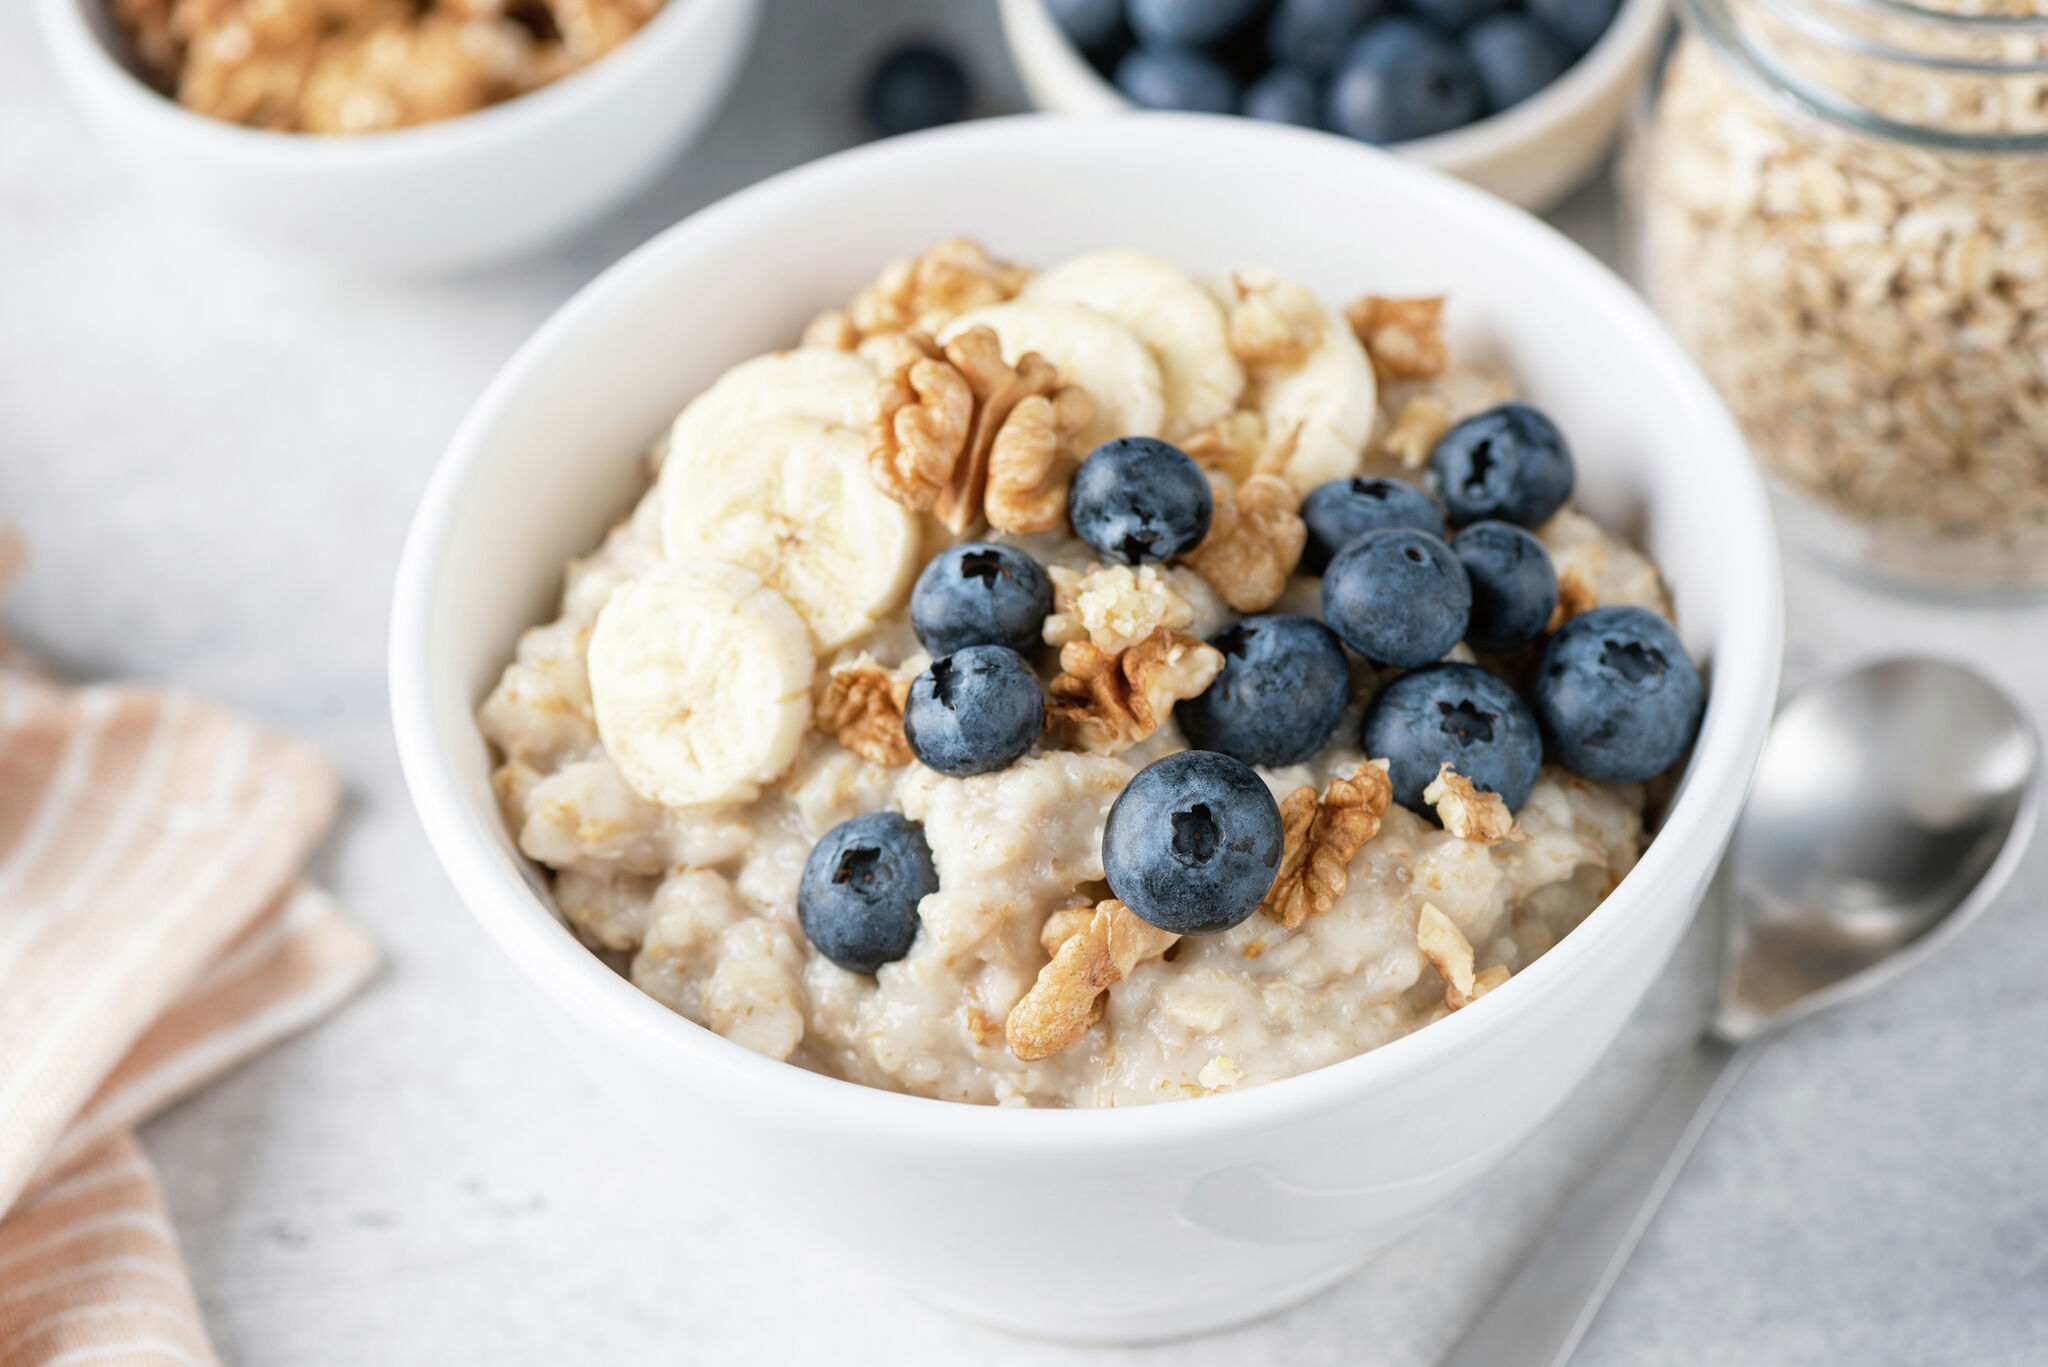 What to Put in Oatmeal for the Tastiest Breakfast